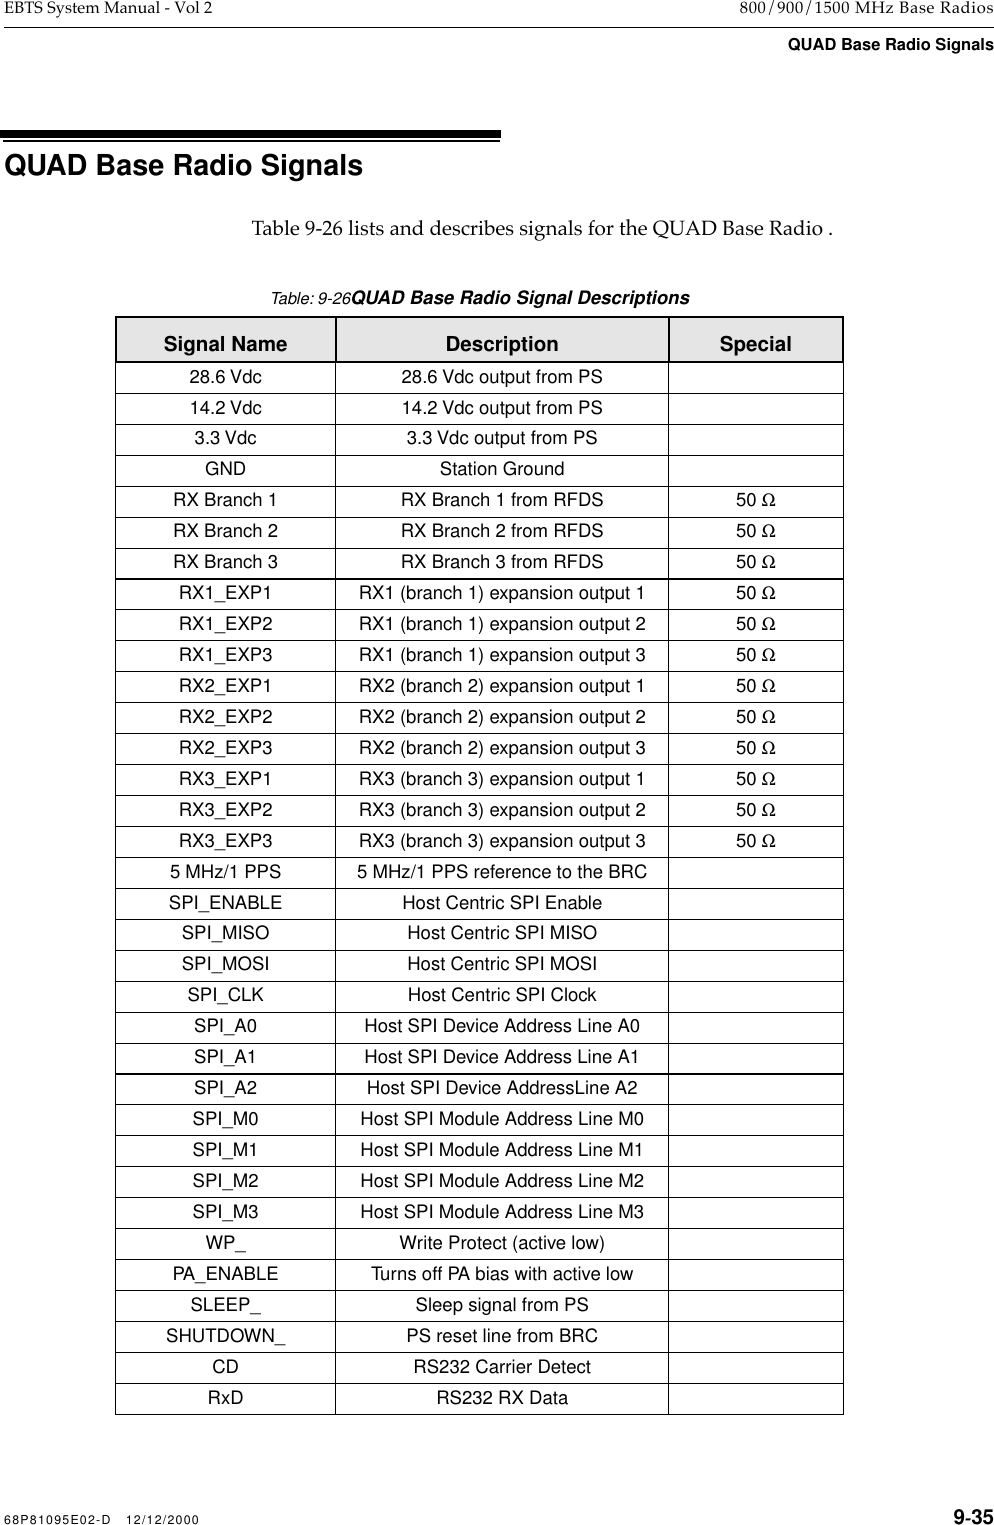 68P81095E02-D   12/12/2000 9-35EBTS System Manual - Vol 2 800/900/1500 MHz Base RadiosQUAD Base Radio SignalsQUAD Base Radio SignalsTable 9-26 lists and describes signals for the QUAD Base Radio .Table: 9-26QUAD Base Radio Signal DescriptionsSignal Name Description Special28.6 Vdc 28.6 Vdc output from PS14.2 Vdc 14.2 Vdc output from PS3.3 Vdc 3.3 Vdc output from PSGND Station GroundRX Branch 1 RX Branch 1 from RFDS 50 ΩRX Branch 2 RX Branch 2 from RFDS 50 ΩRX Branch 3 RX Branch 3 from RFDS 50 ΩRX1_EXP1 RX1 (branch 1) expansion output 1 50 ΩRX1_EXP2 RX1 (branch 1) expansion output 2 50 ΩRX1_EXP3 RX1 (branch 1) expansion output 3 50 ΩRX2_EXP1 RX2 (branch 2) expansion output 1 50 ΩRX2_EXP2 RX2 (branch 2) expansion output 2 50 ΩRX2_EXP3 RX2 (branch 2) expansion output 3 50 ΩRX3_EXP1 RX3 (branch 3) expansion output 1 50 ΩRX3_EXP2 RX3 (branch 3) expansion output 2 50 ΩRX3_EXP3 RX3 (branch 3) expansion output 3 50 Ω5 MHz/1 PPS 5 MHz/1 PPS reference to the BRCSPI_ENABLE Host Centric SPI EnableSPI_MISO Host Centric SPI MISOSPI_MOSI Host Centric SPI MOSISPI_CLK Host Centric SPI ClockSPI_A0 Host SPI Device Address Line A0SPI_A1 Host SPI Device Address Line A1SPI_A2 Host SPI Device AddressLine A2SPI_M0 Host SPI Module Address Line M0SPI_M1 Host SPI Module Address Line M1SPI_M2 Host SPI Module Address Line M2SPI_M3 Host SPI Module Address Line M3WP_ Write Protect (active low)PA_ENABLE Turns off PA bias with active lowSLEEP_ Sleep signal from PSSHUTDOWN_ PS reset line from BRCCD RS232 Carrier DetectRxD RS232 RX Data